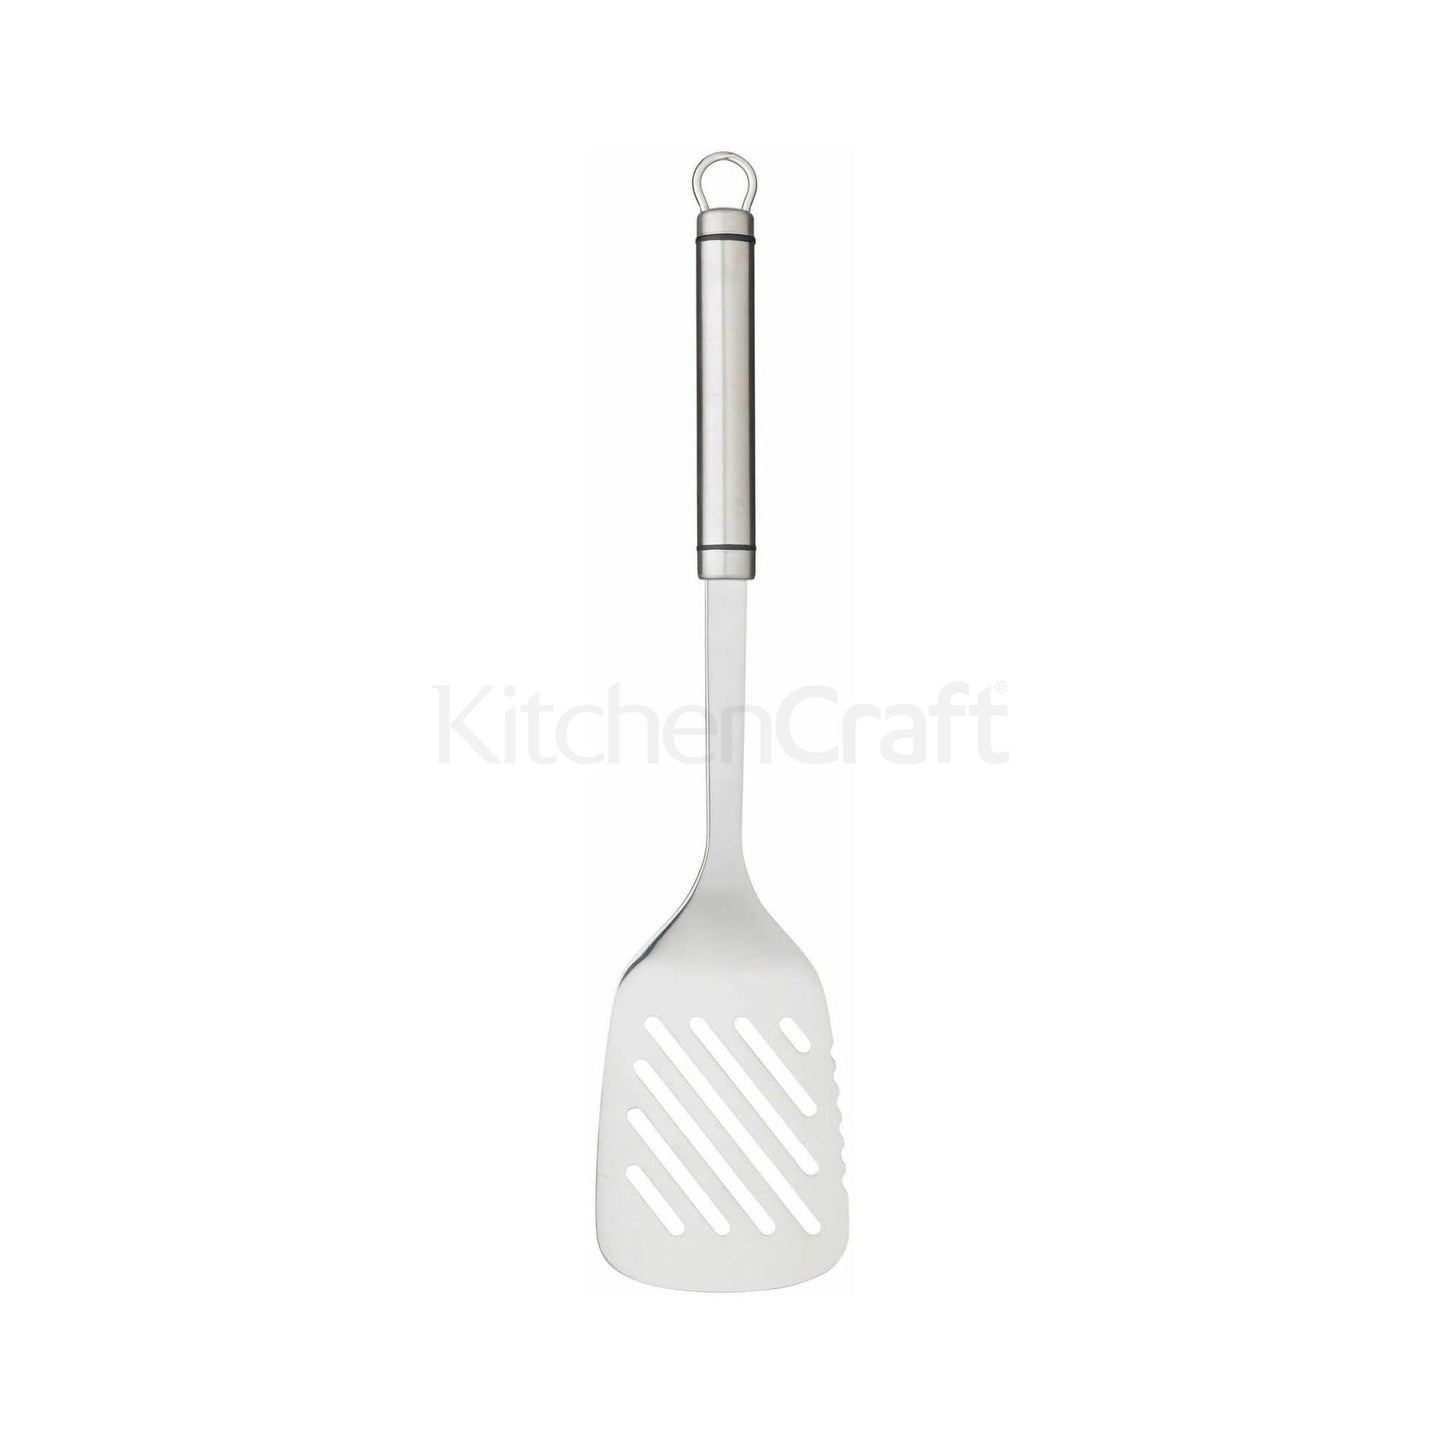 KitchenCraft Stainless Steel Slotted Turner 13cmx8cm